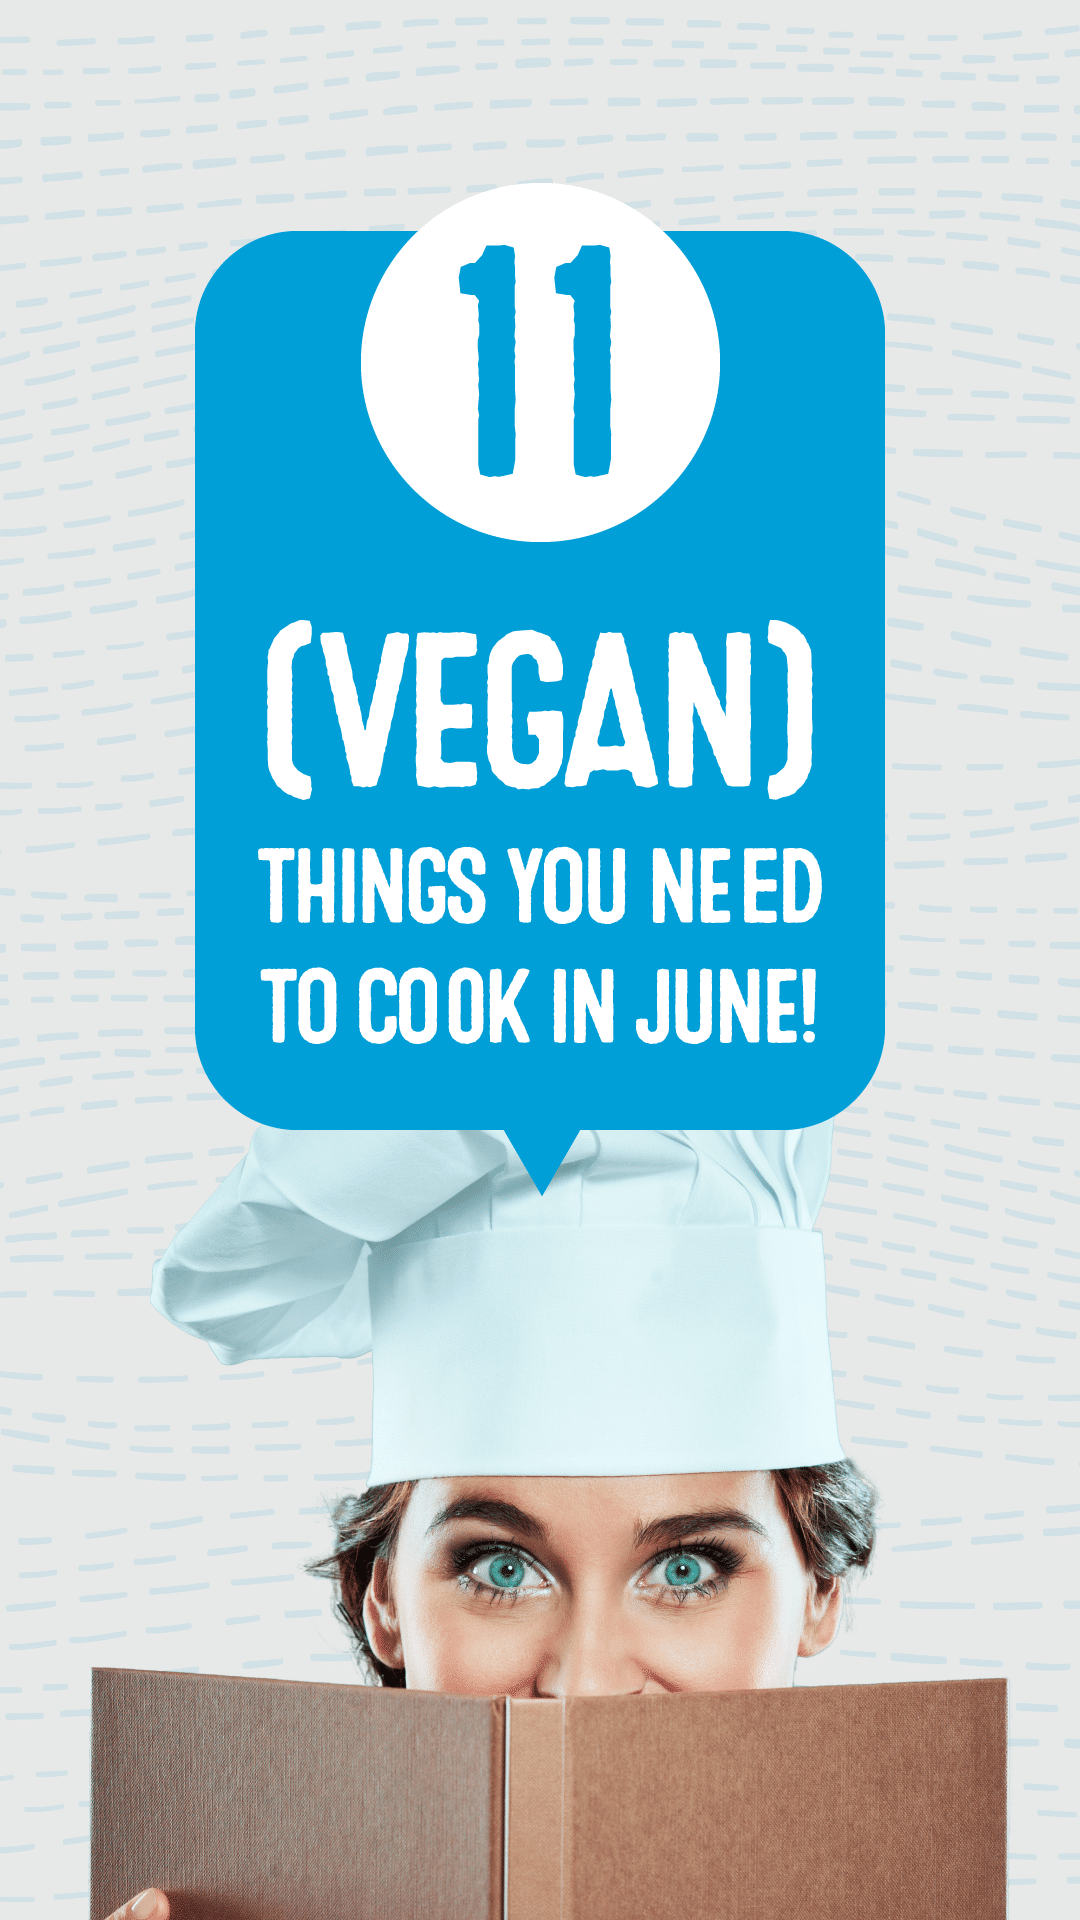 11 (Vegan) Things You Need to Cook in June